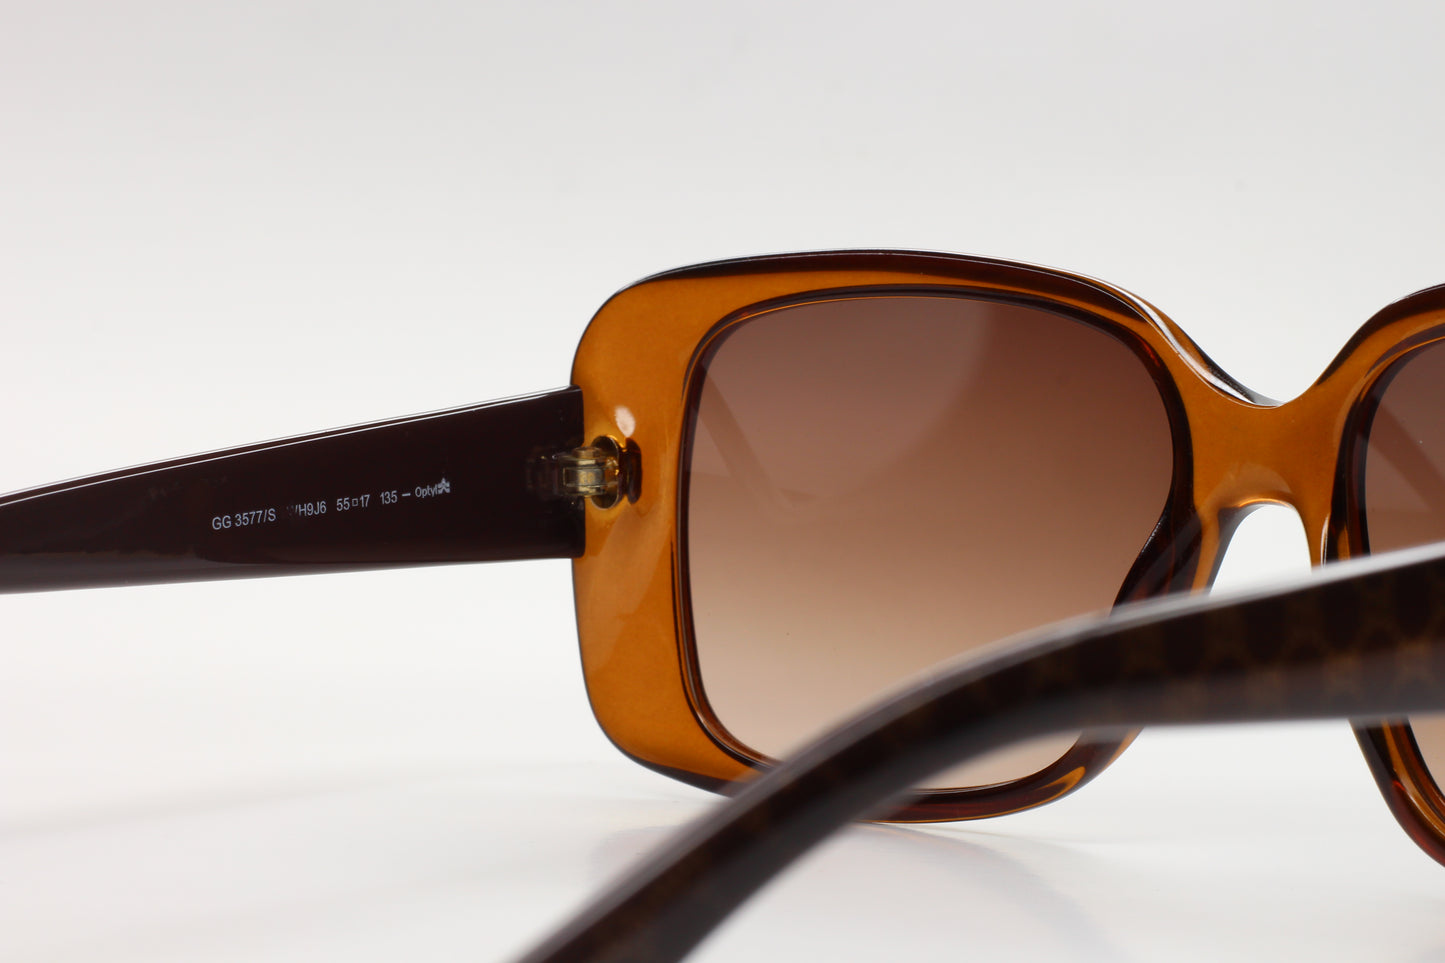 Gucci GG3577S WH9J6 Brown Gold Luxury Sunglasses